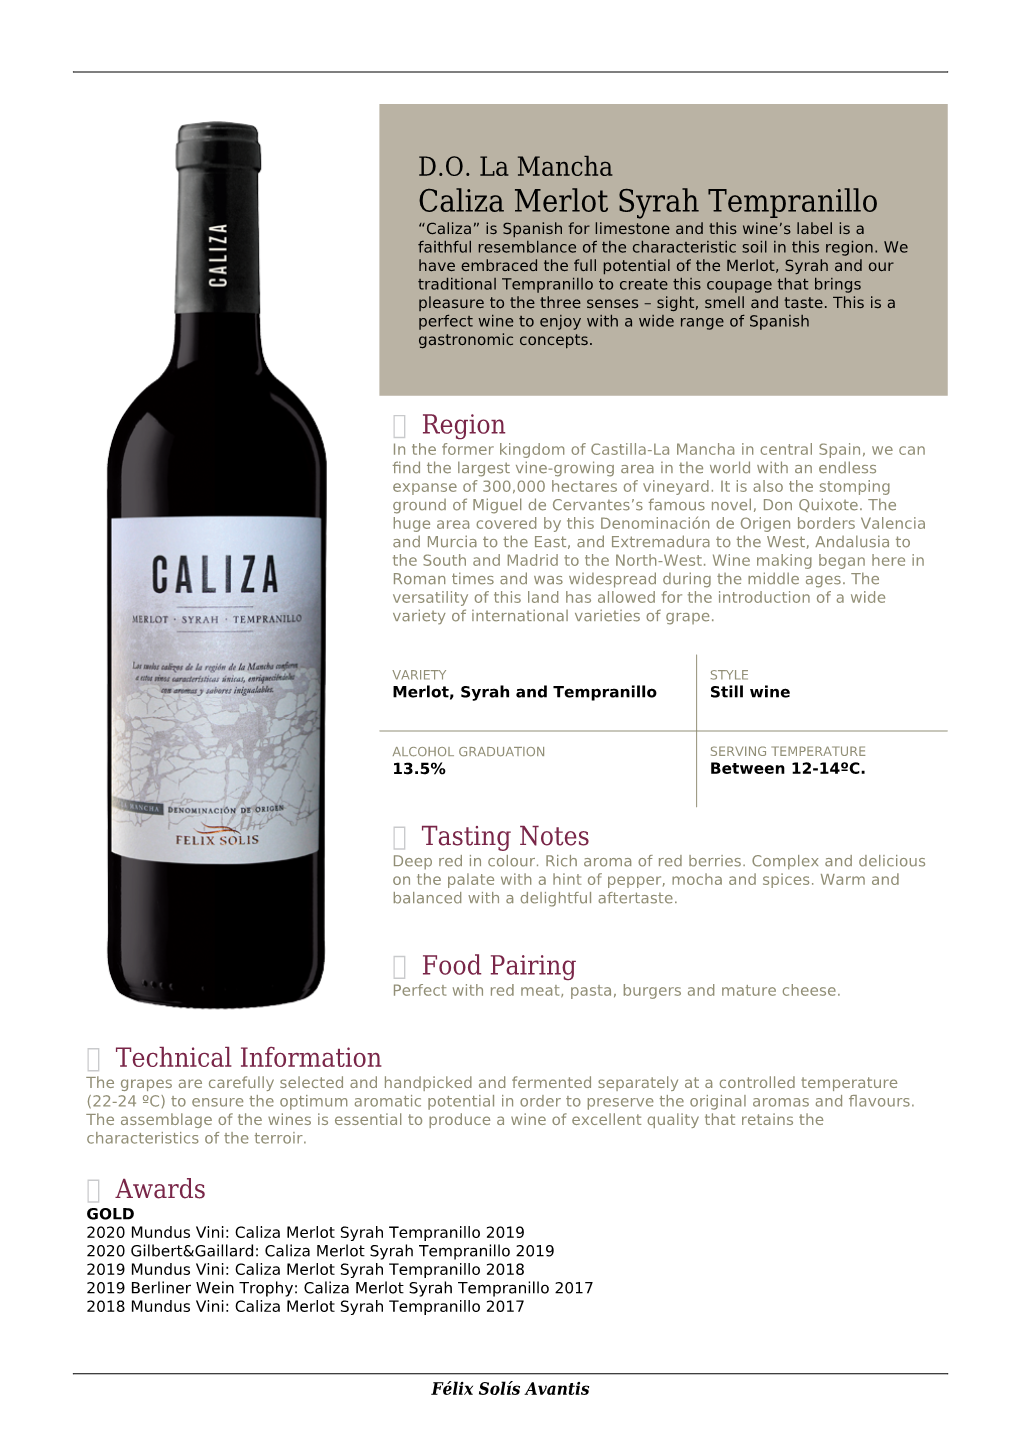 Caliza Merlot Syrah Tempranillo “Caliza” Is Spanish for Limestone and This Wine’S Label Is a Faithful Resemblance of the Characteristic Soil in This Region